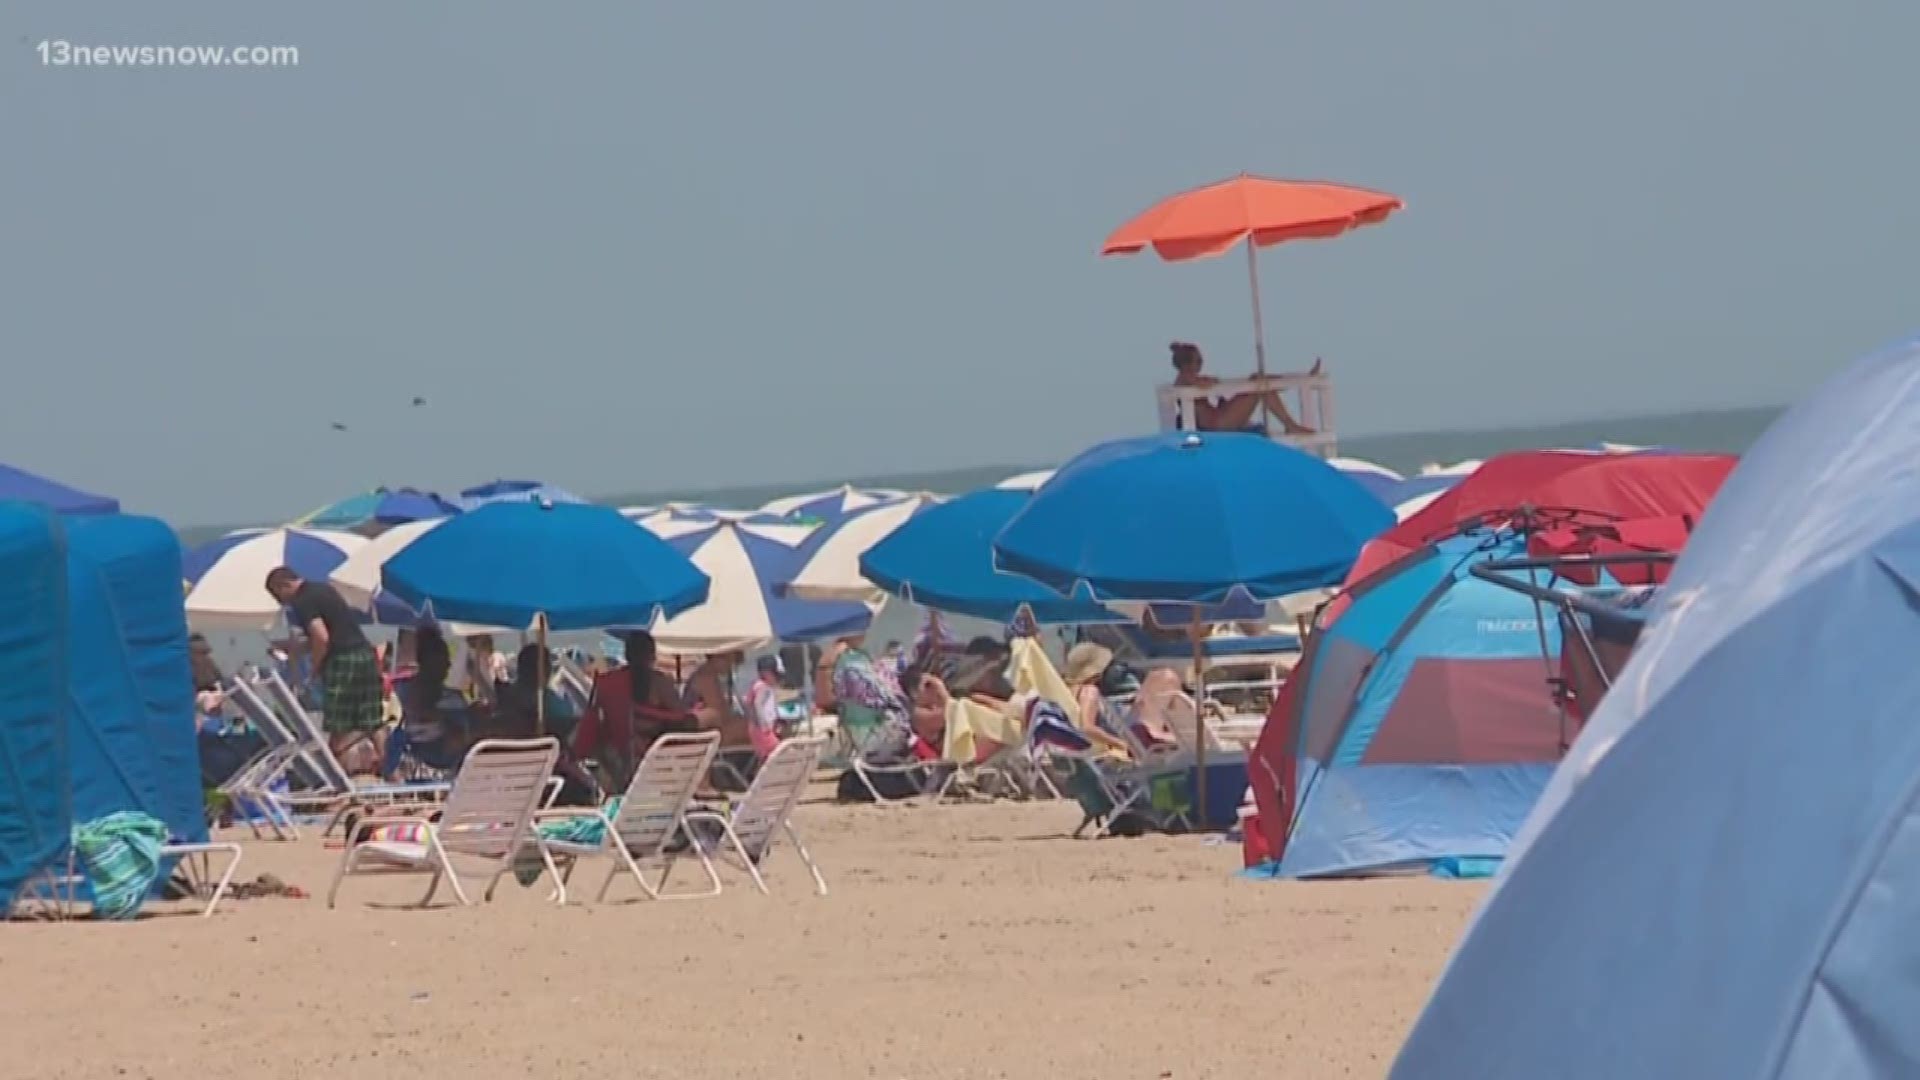 Senators Tim Kaine and Mark Warner are working to get a safety campaign started for beach umbrellas. It's an issue that has turned deadly in Hampton Roads.